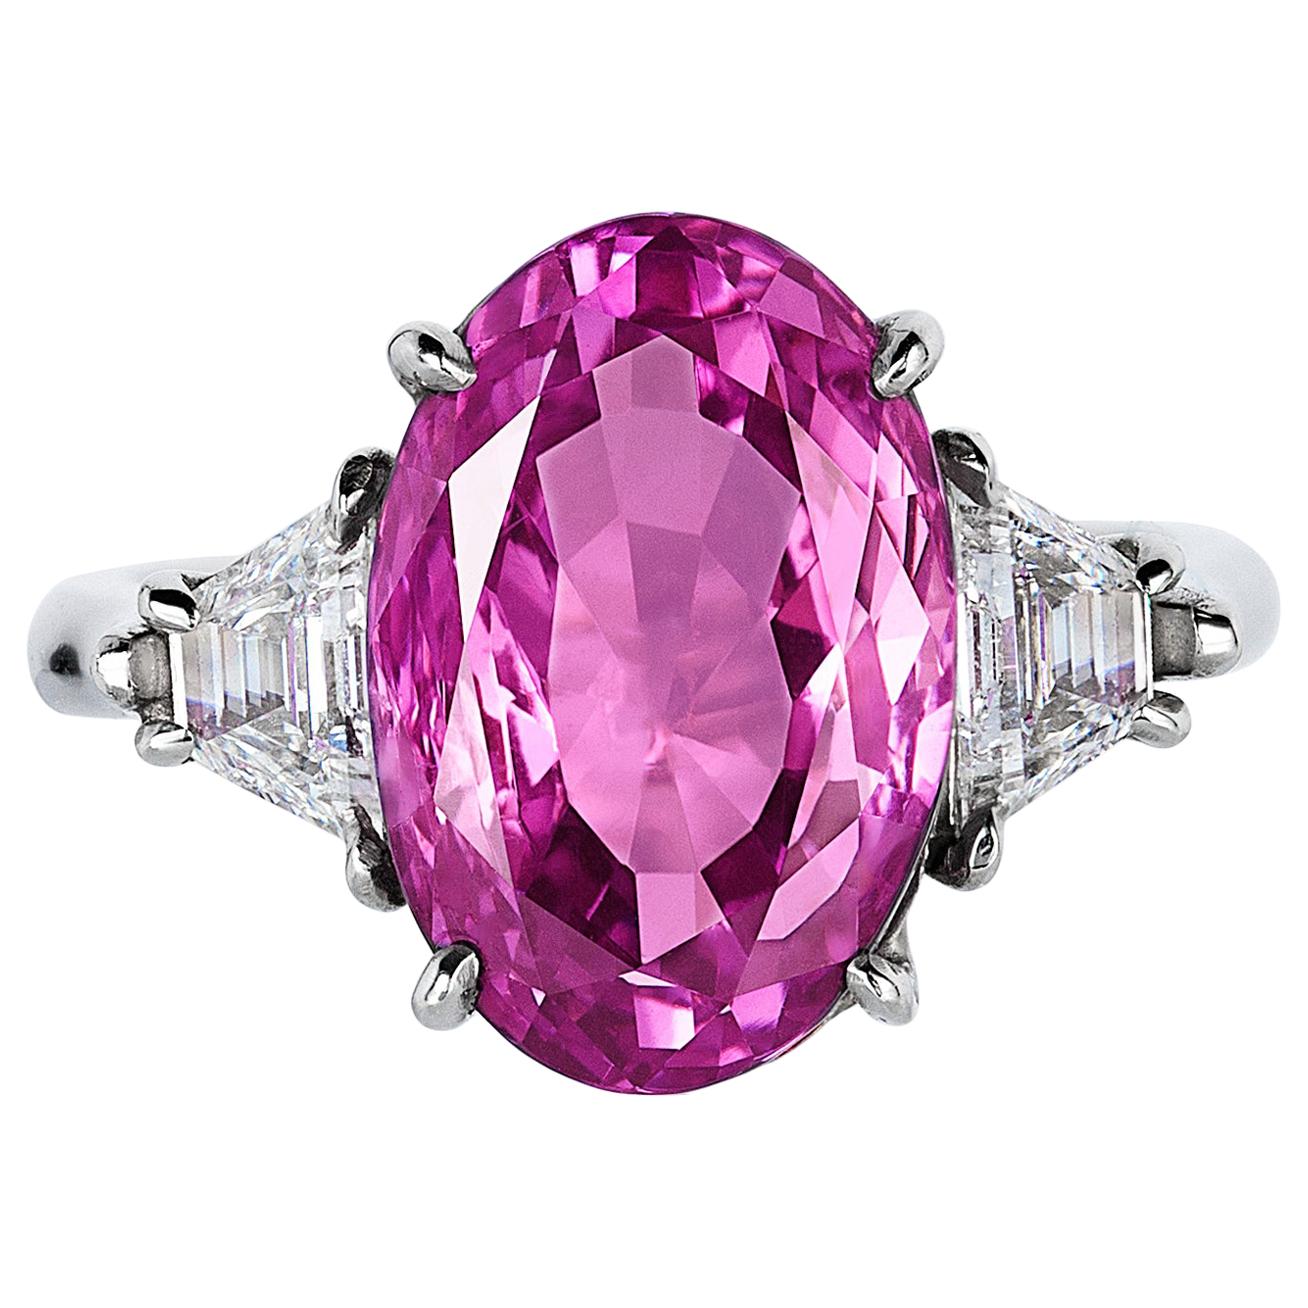 Andreoli GIA Certified 9.39 Carat Pink Sapphire Diamond Platinum Ring For Sale